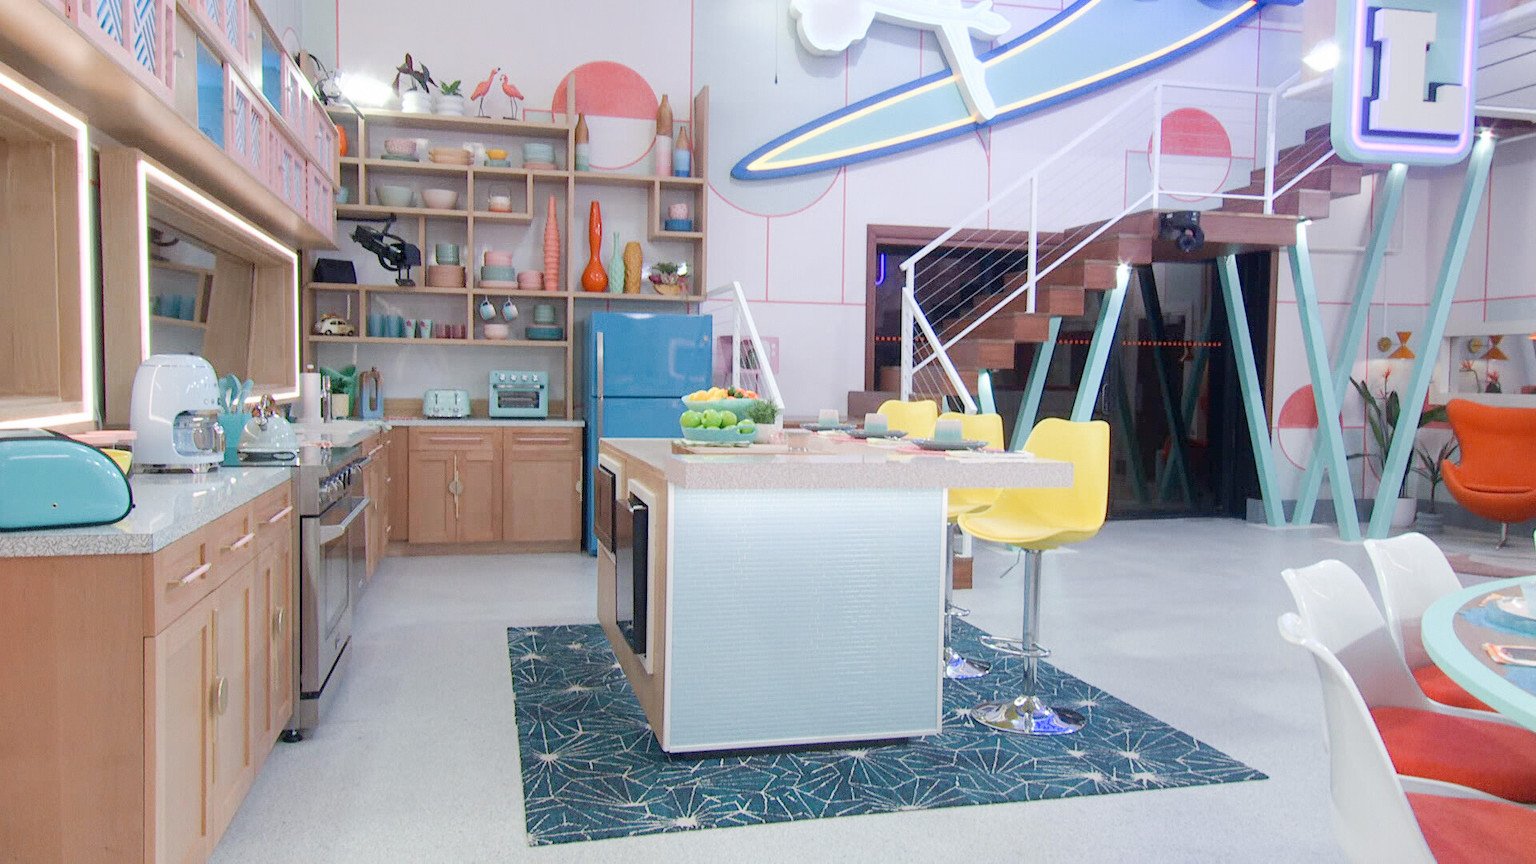 The 'BB Motel' in 'Big Brother' 24